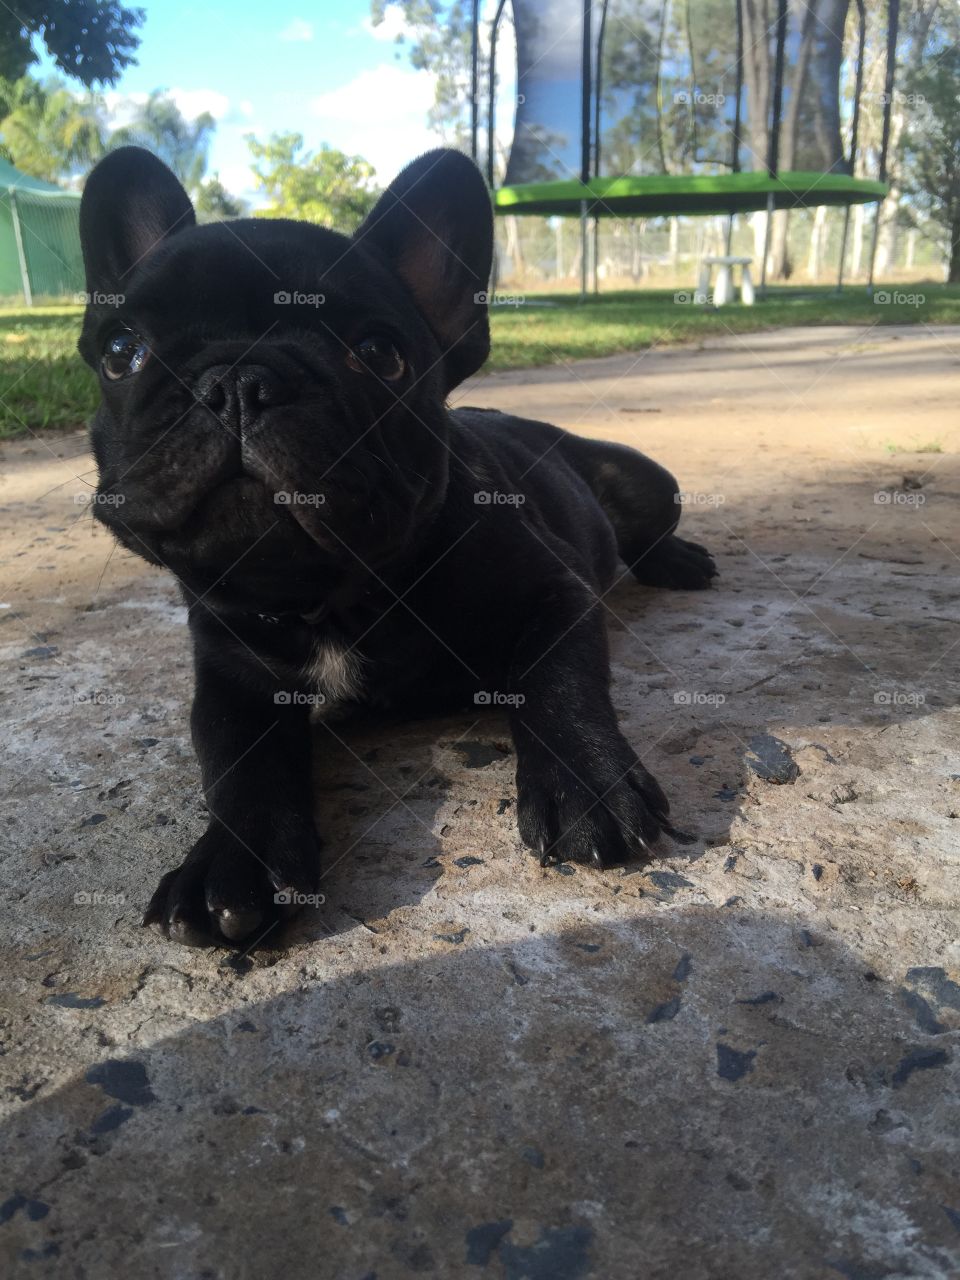 Dudley. Our little frenchie Dudley
